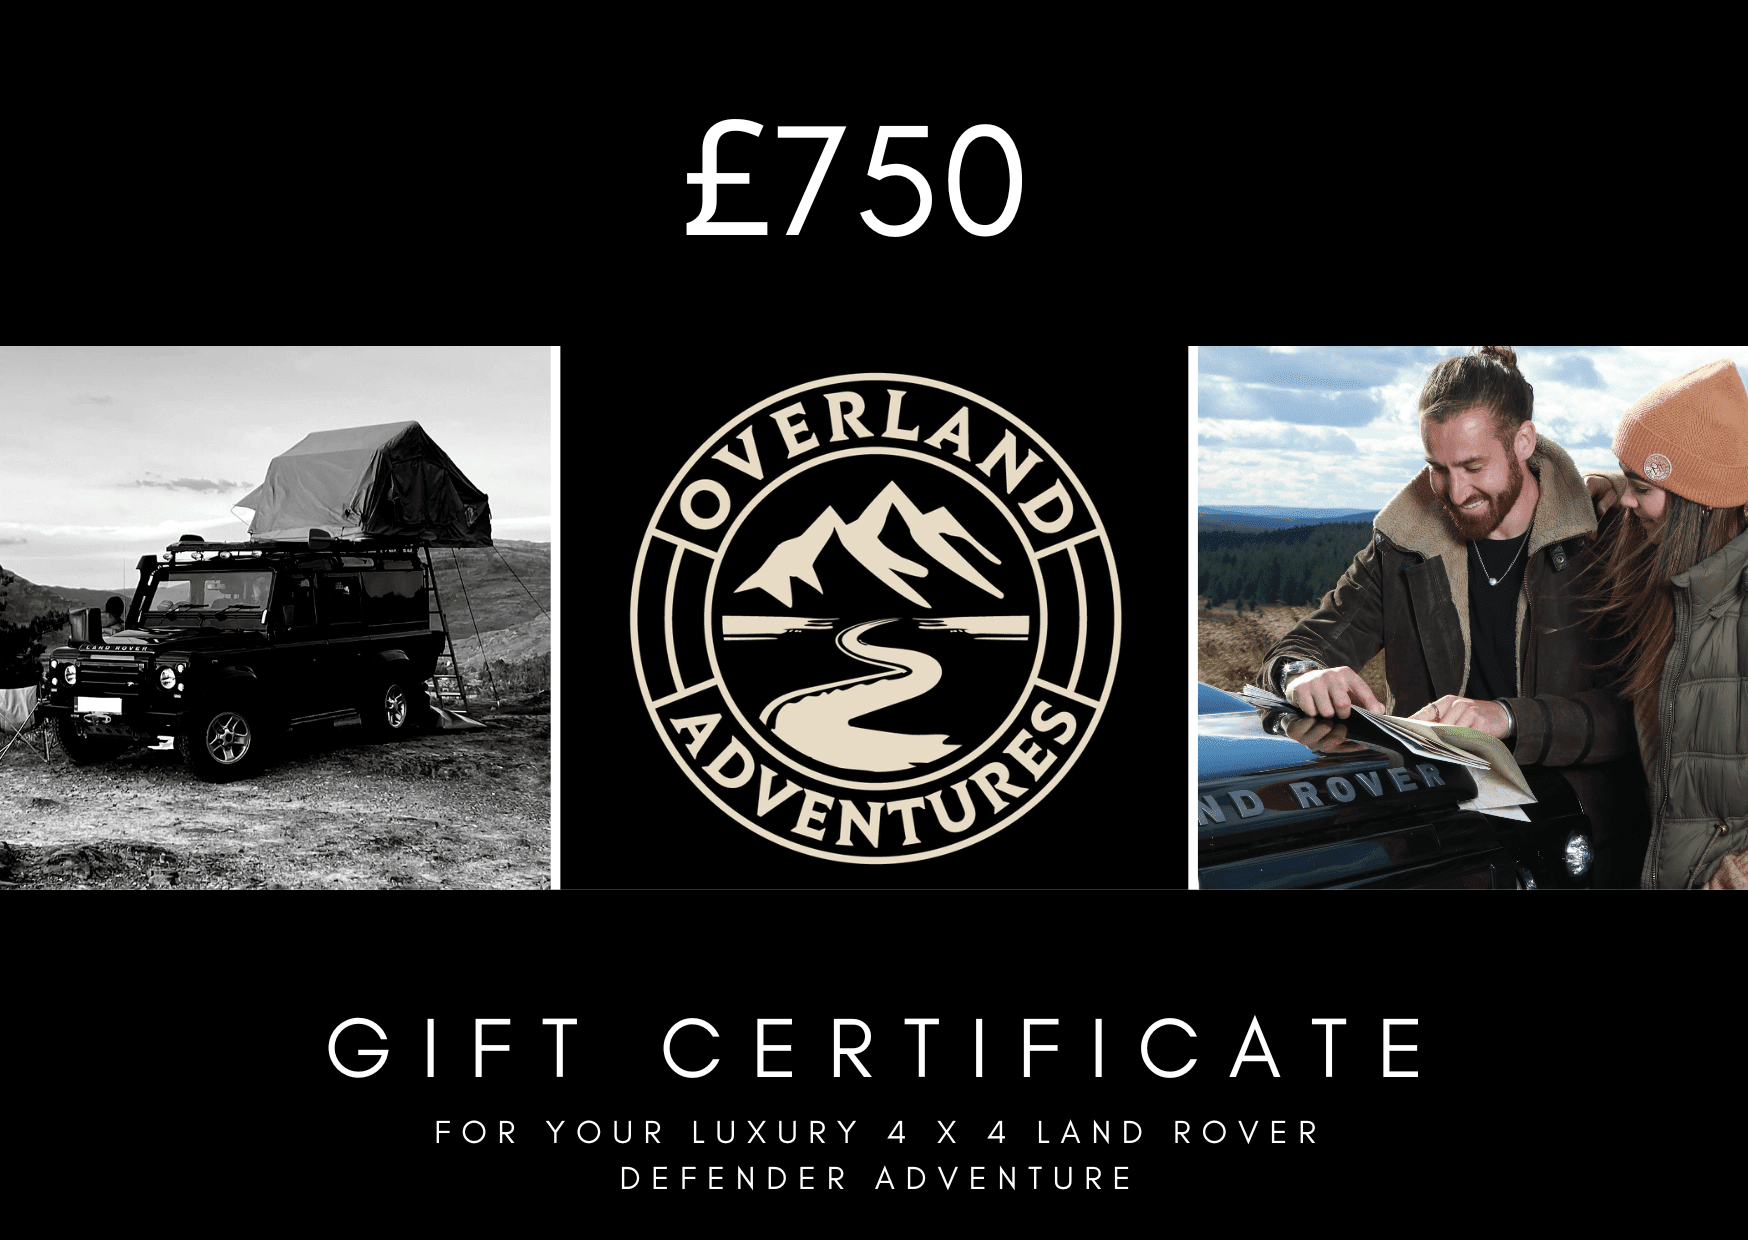 Landrover Defender Hire Northumberland Gift Card